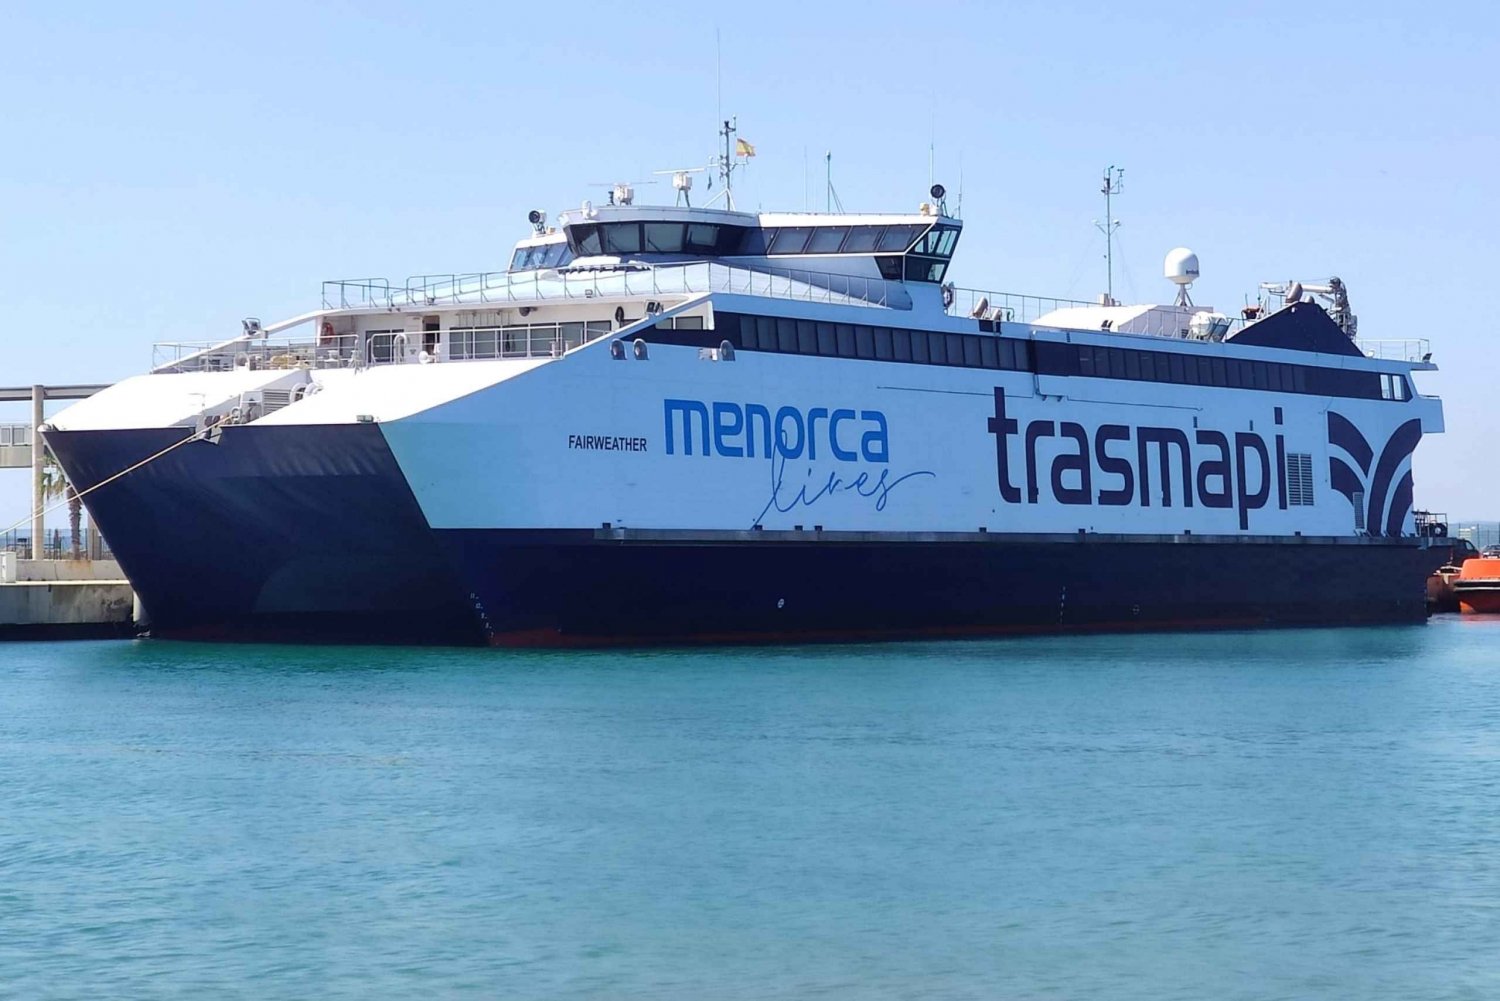 From Menorca: Same-Day Round-Trip Ferry Ticket to Mallorca